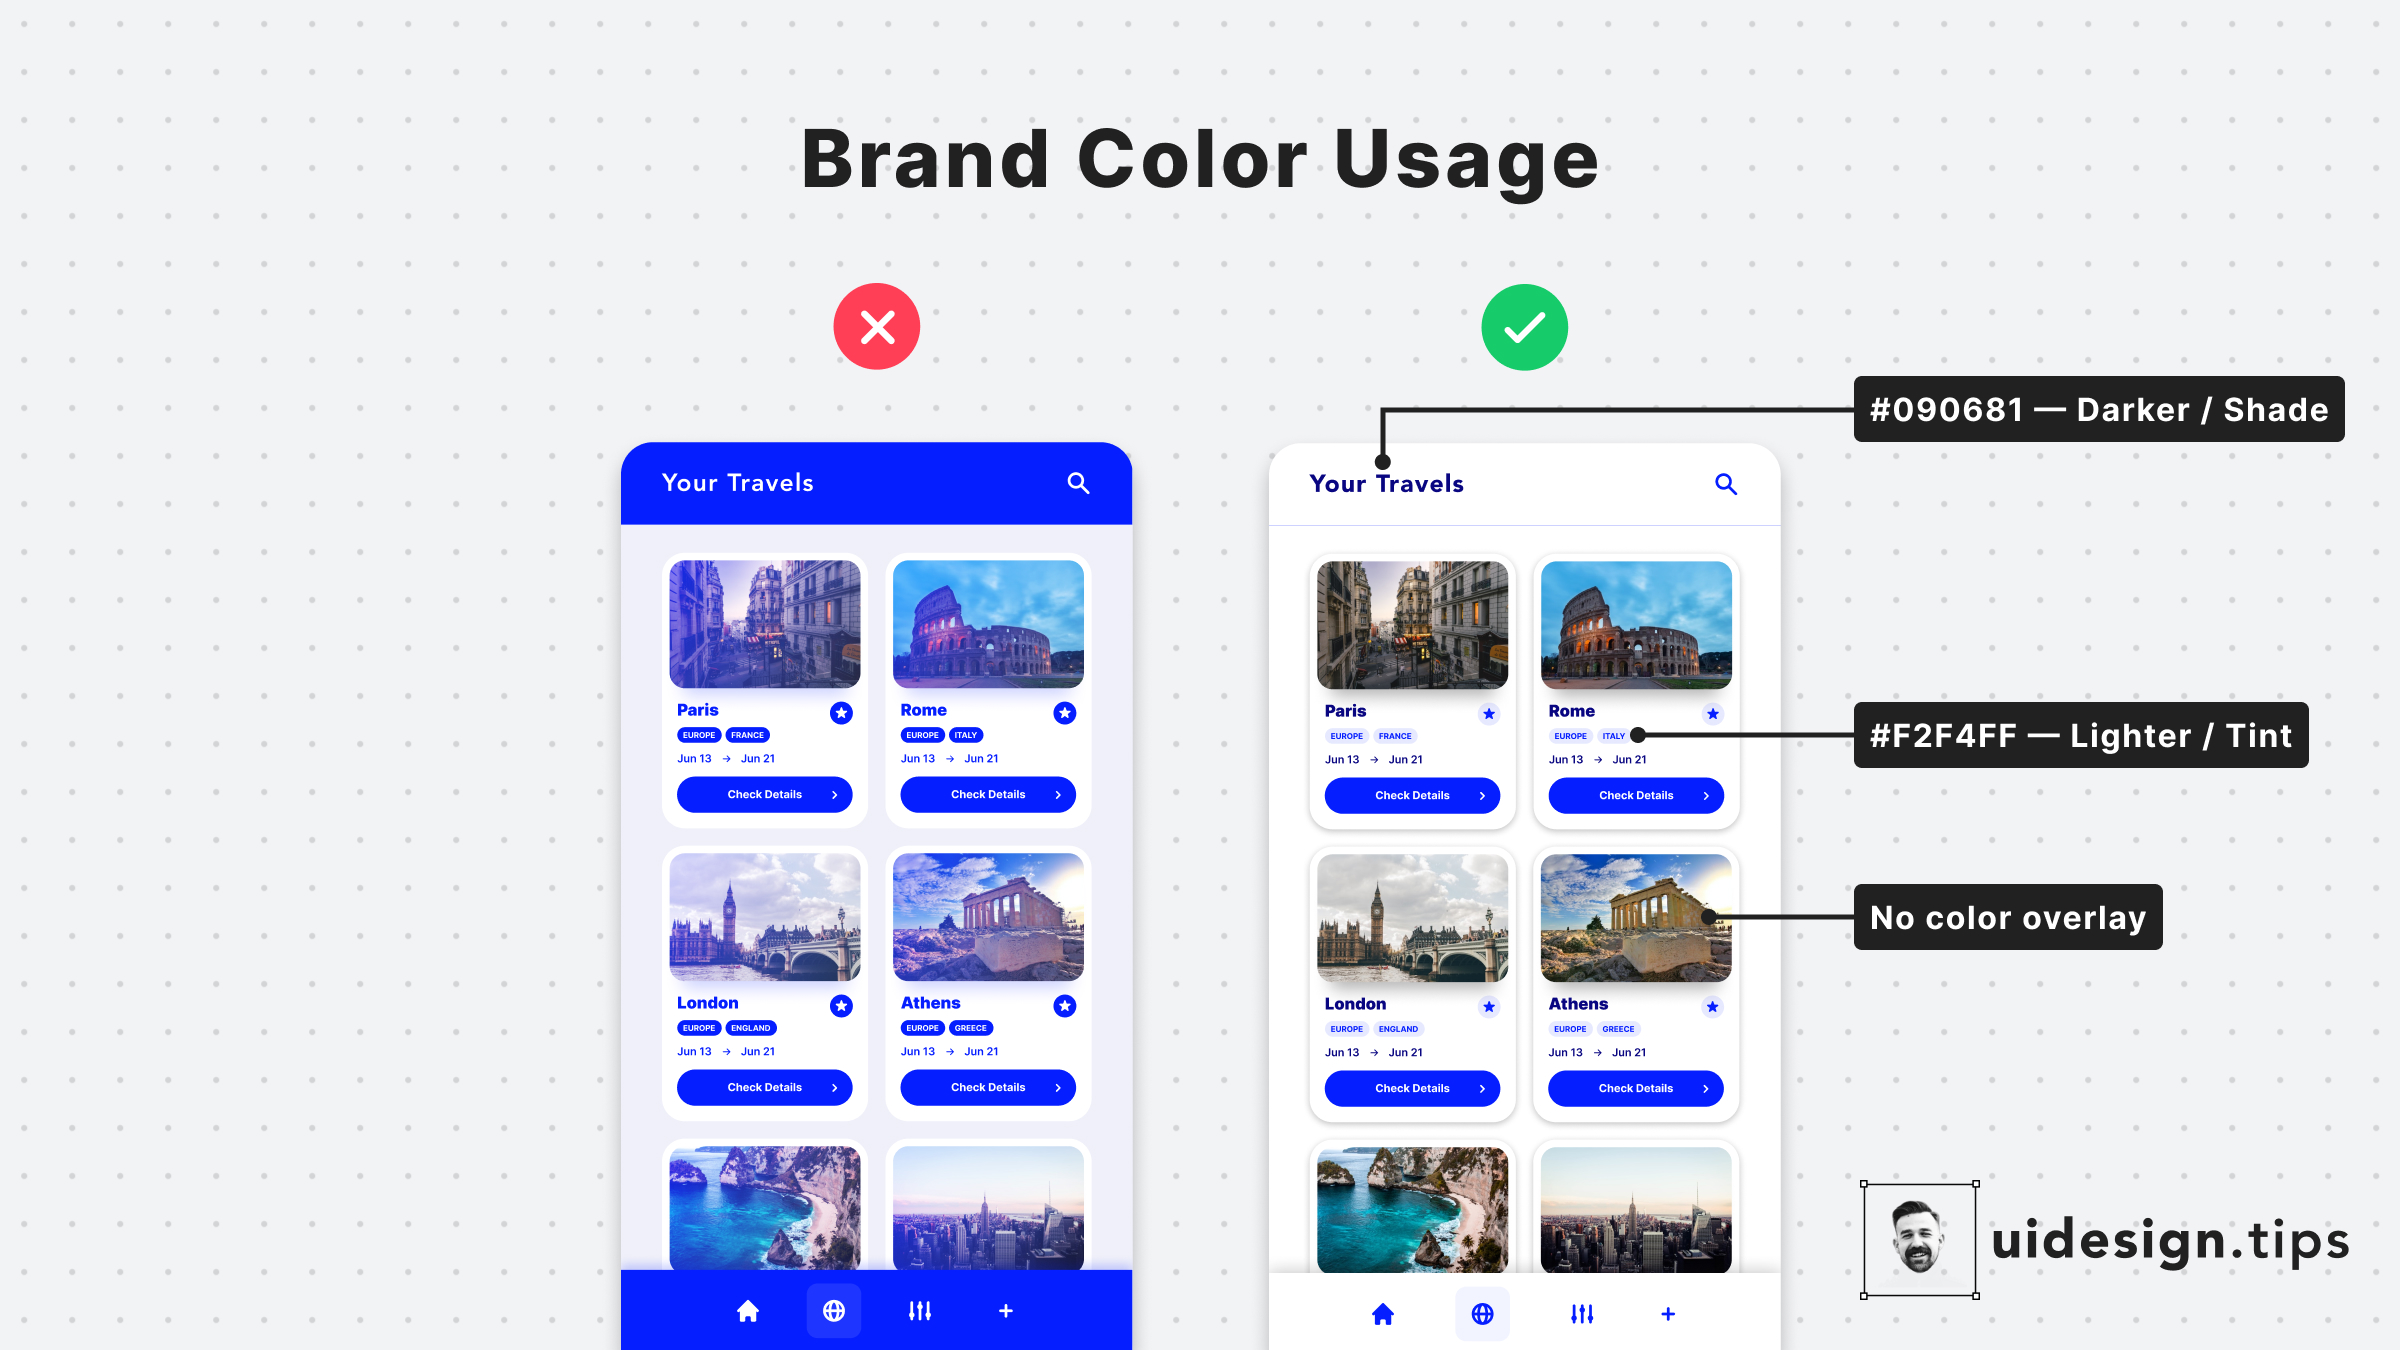 How to Apply the Brand Color